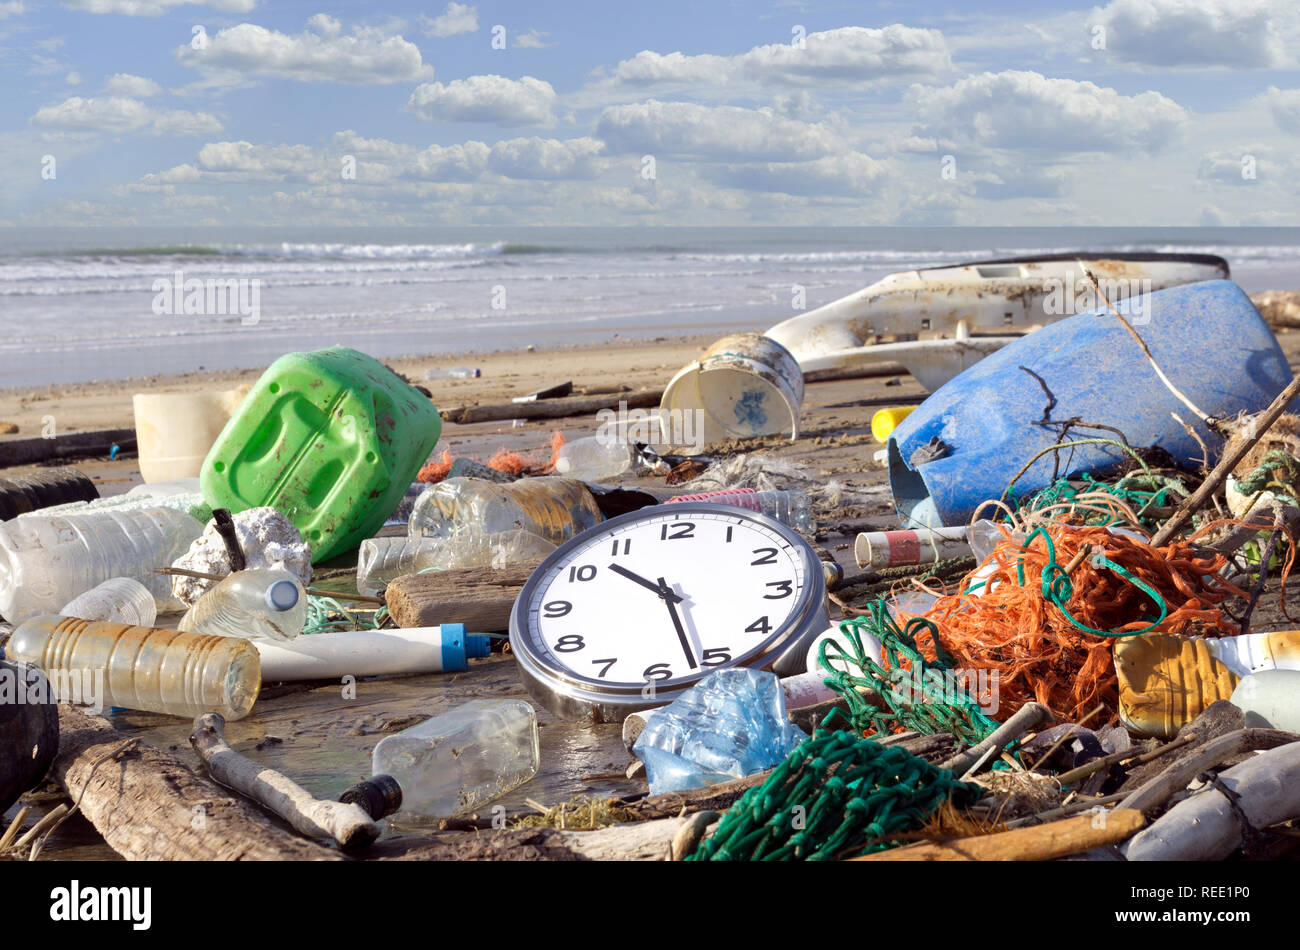 Trash beach pollution. Garbages, plastic, and wastes on the beach. Pollution: it’s time to wake up! Stock Photo